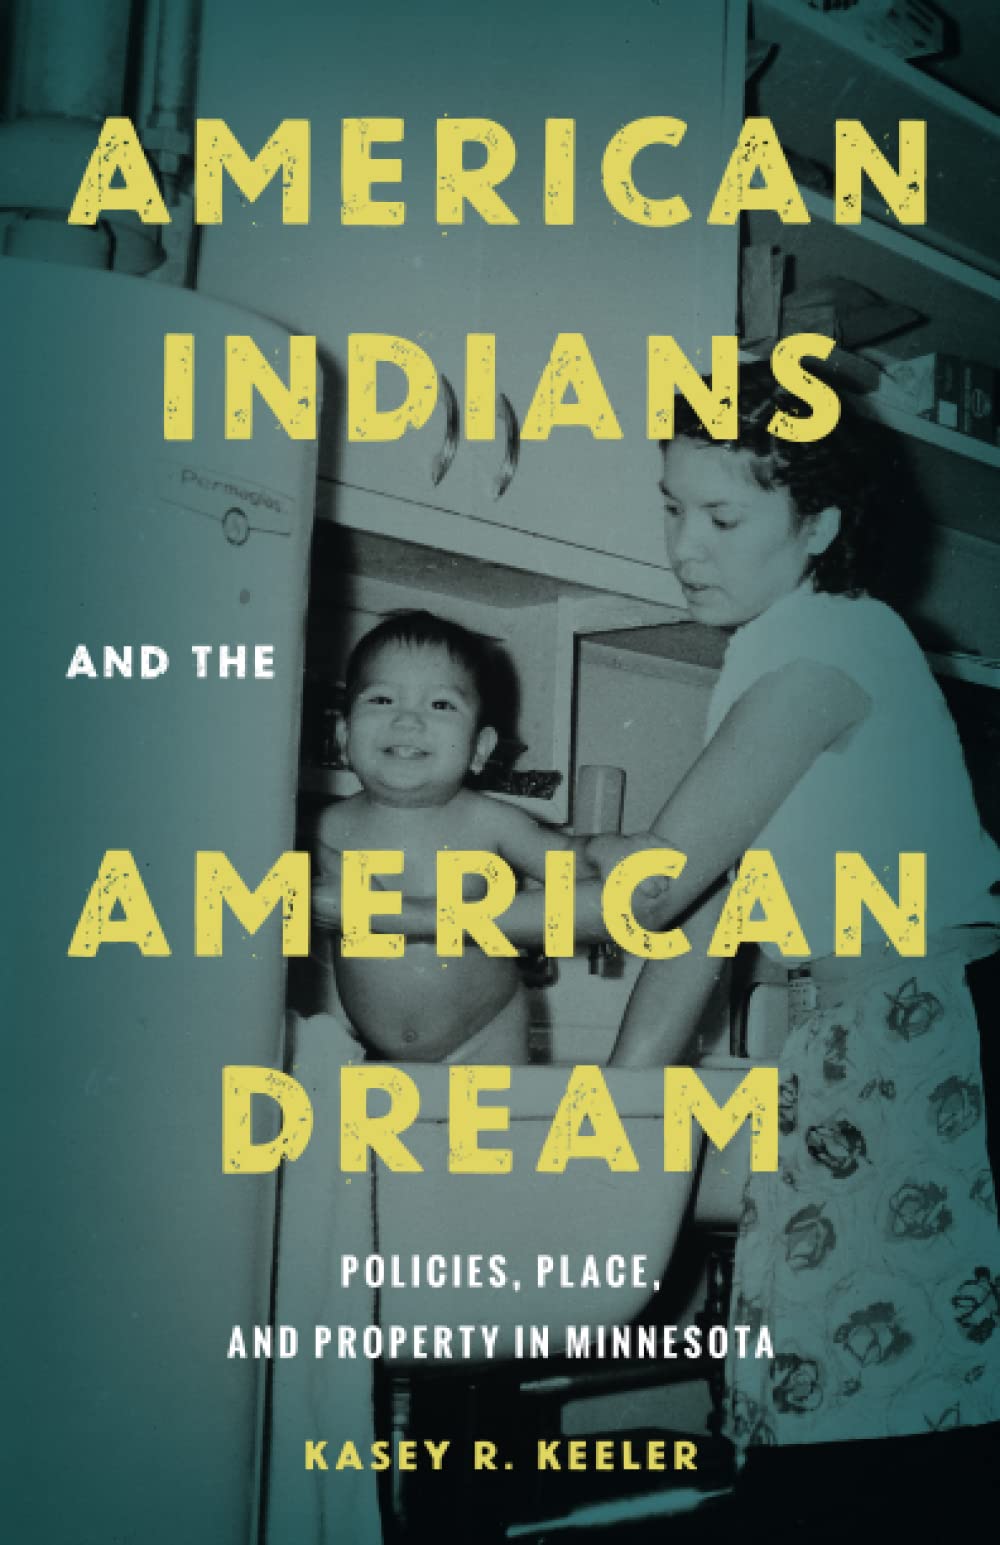 American Indians and the American Dream: Policies, Place, and Property in Minnesota by Kasey R. Keeler